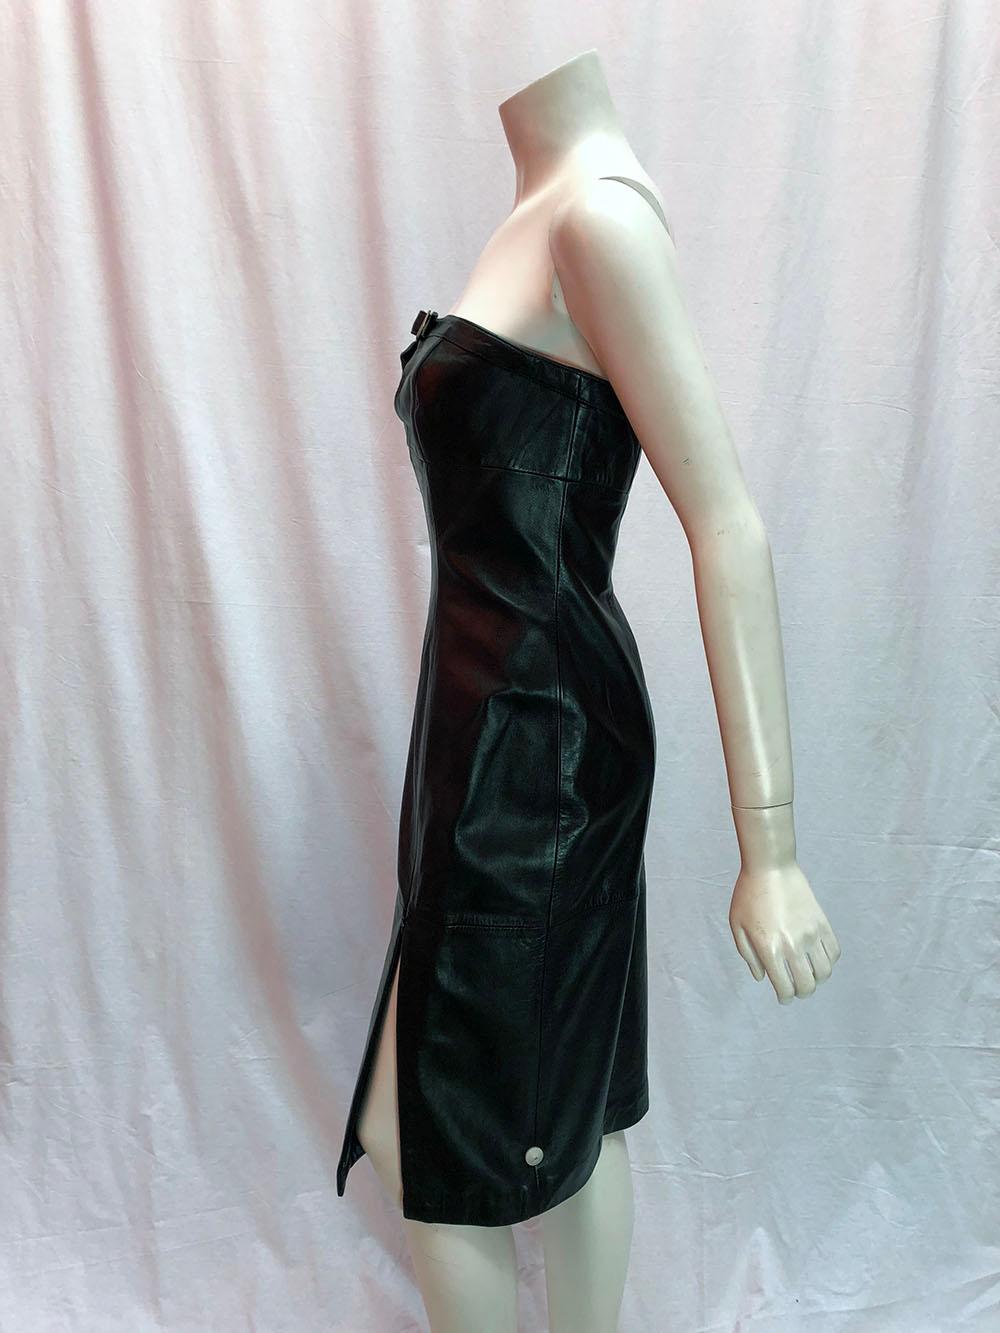 Thierry Mugler Vintage Black Leather Buckle Dress
Vintage strapless leather Thierry Mugler night out dress. Features silver buckle above the bust and a deep side slit which can be zipped up or down to reveal more or less leg. Size 42. 

Est. Retail: